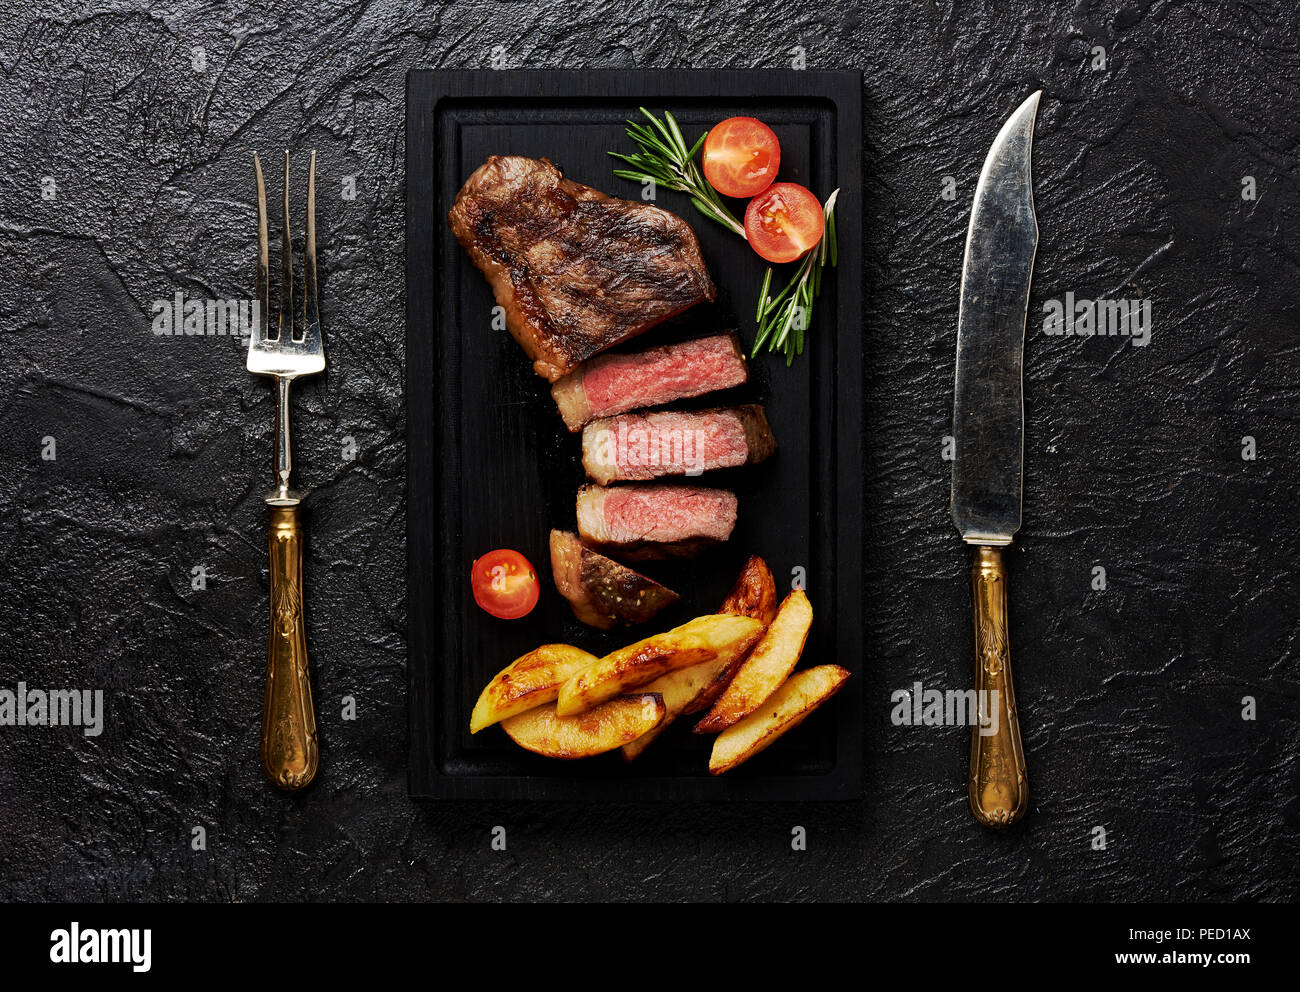 Meat Picanha steak, traditional Brazilian cut with tomatoes, potato wedges and rosemary on black meat cutting board. Steak with fork and knife. Black concrete background. Stock Photo